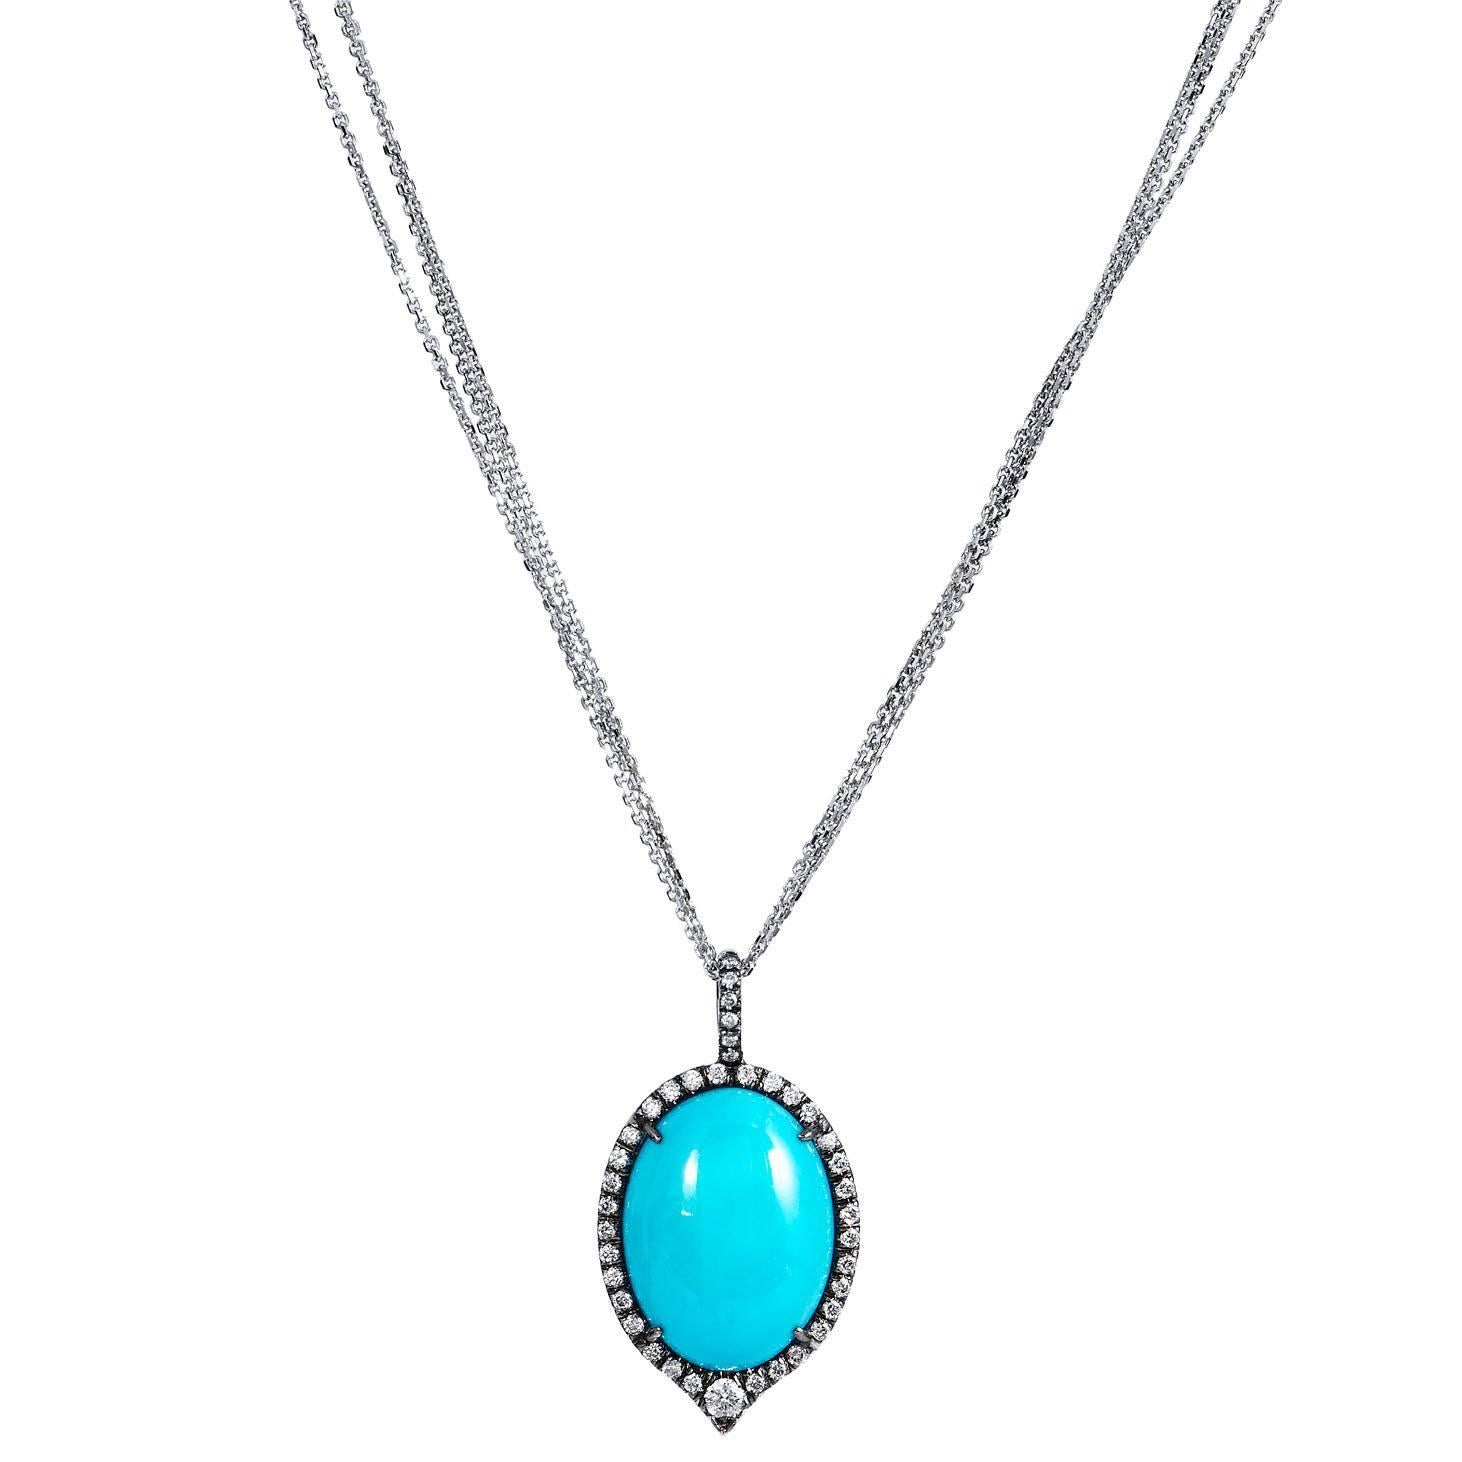 H&H Handmade Turquoise White Gold Diamond Pendant Necklace For Sale